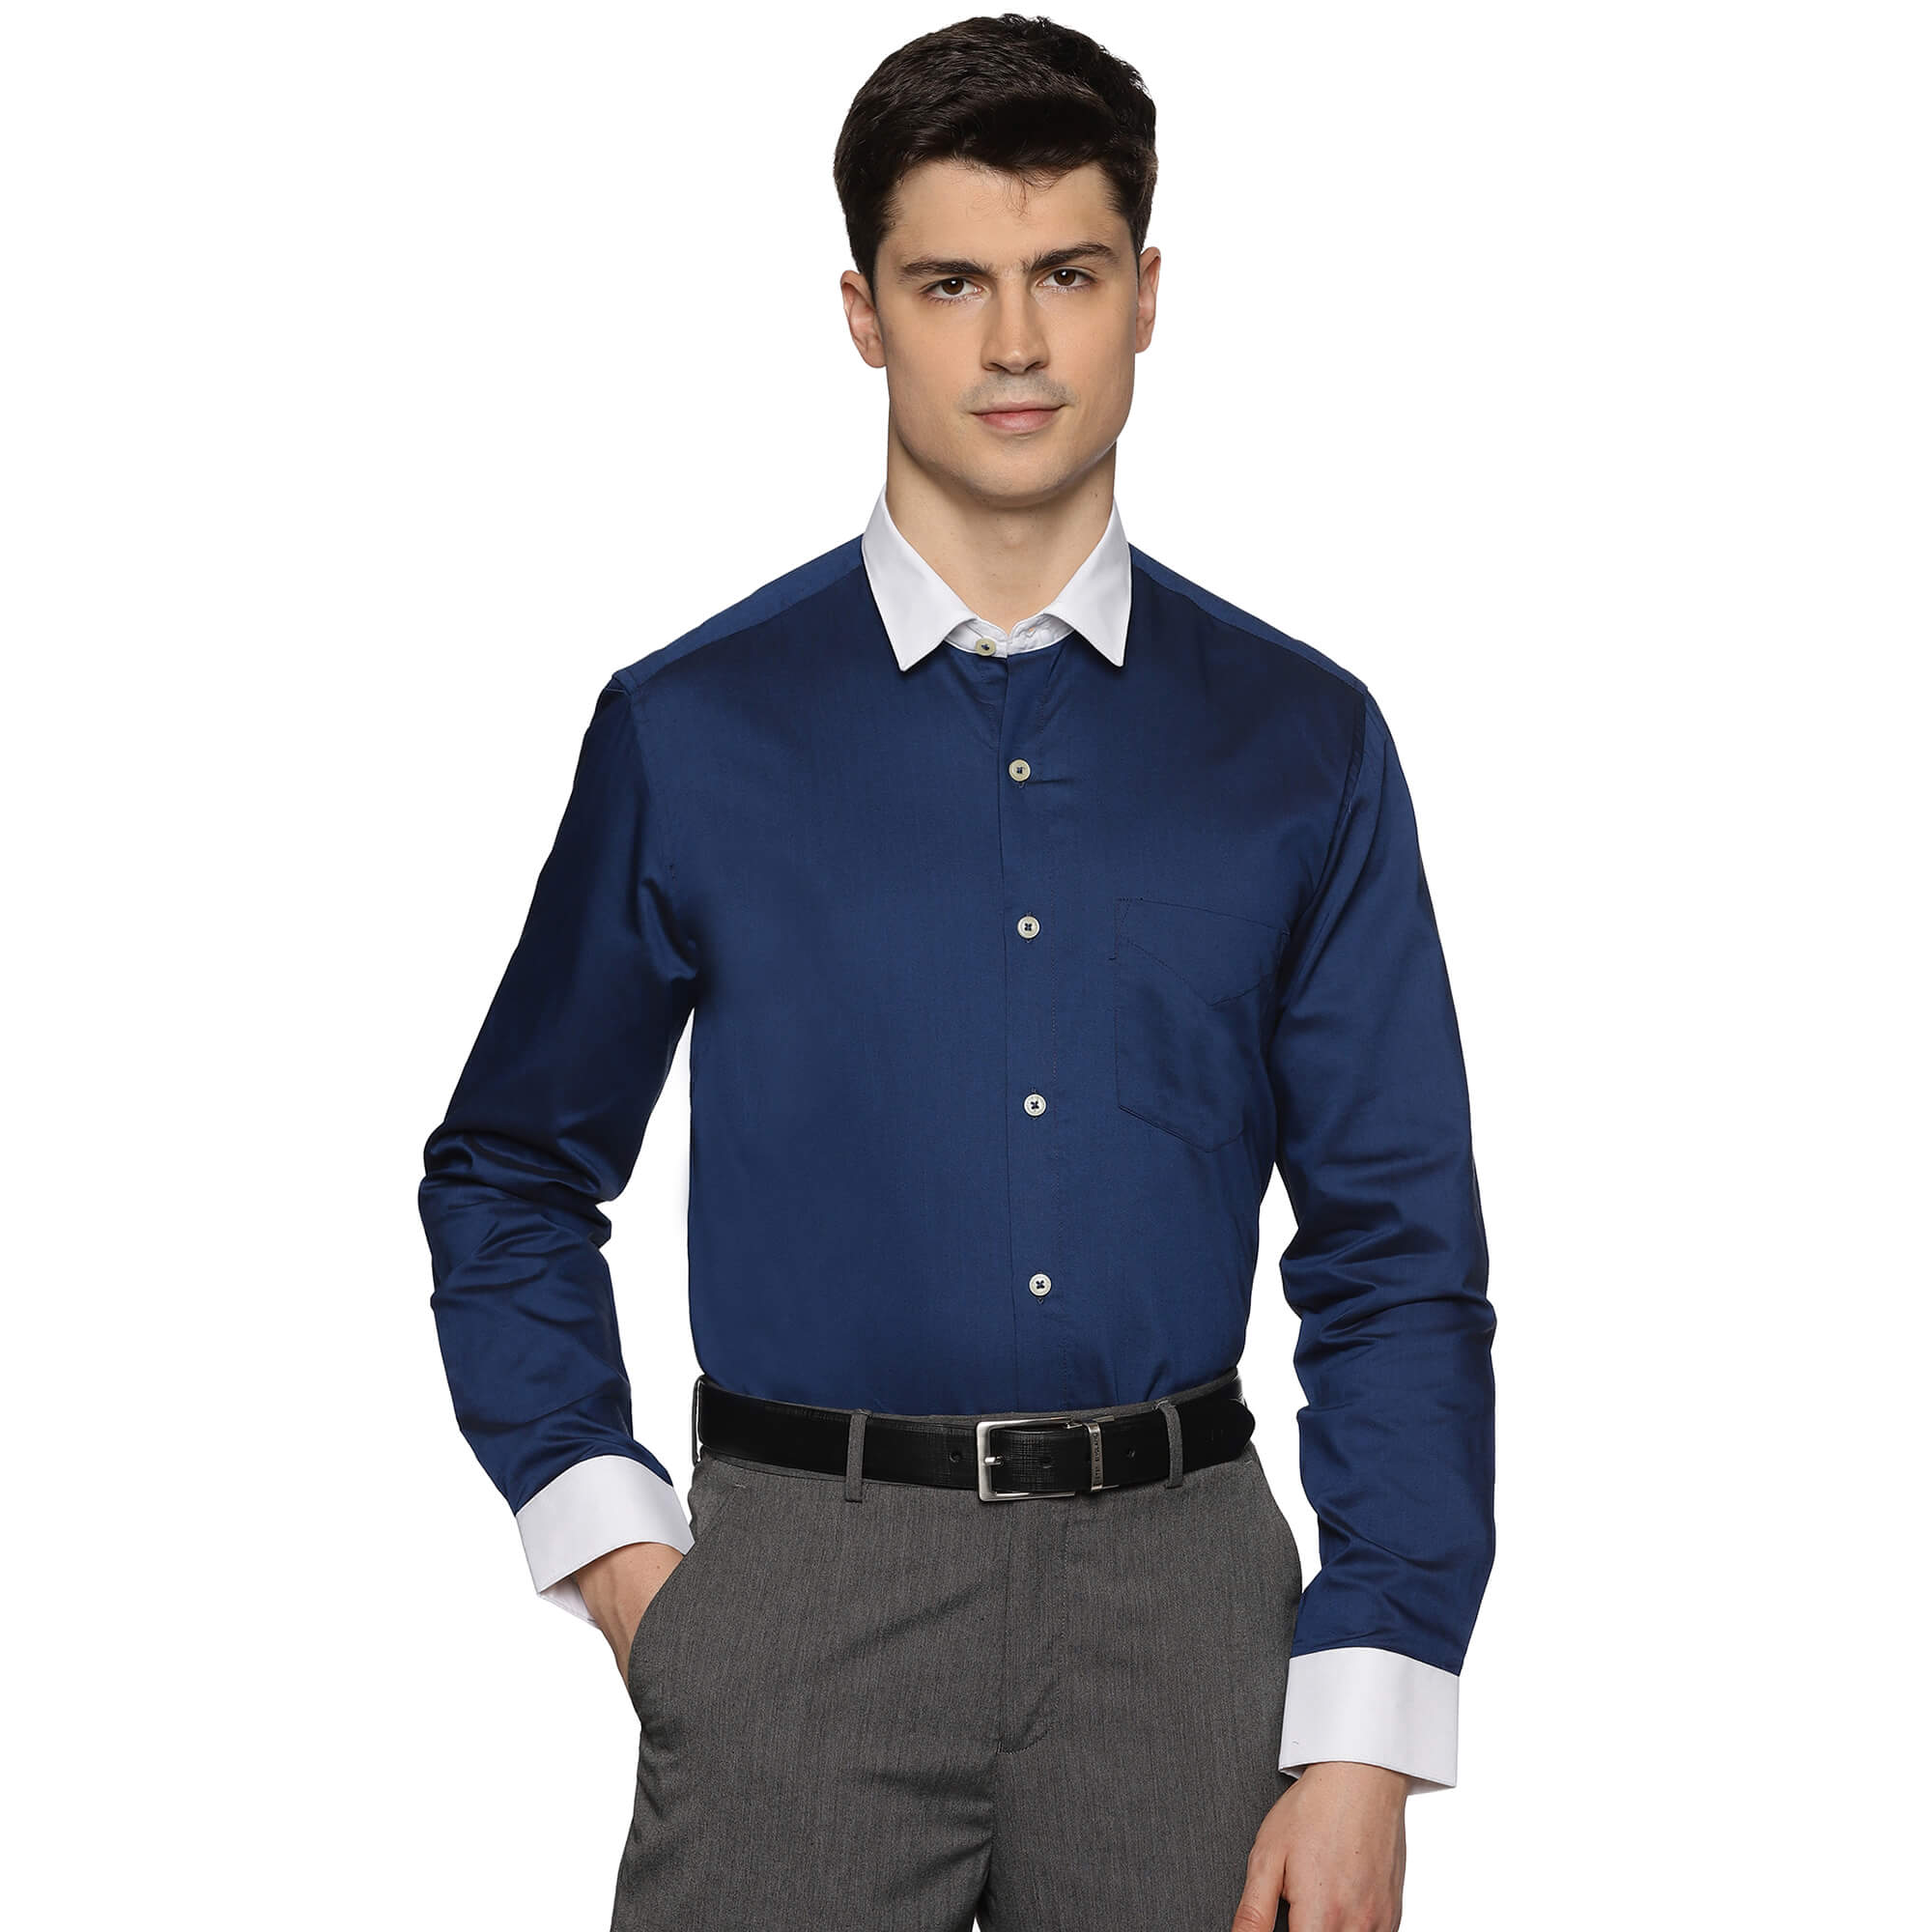 White Collar Solid Shirt In Navy Blue - The Formal Club